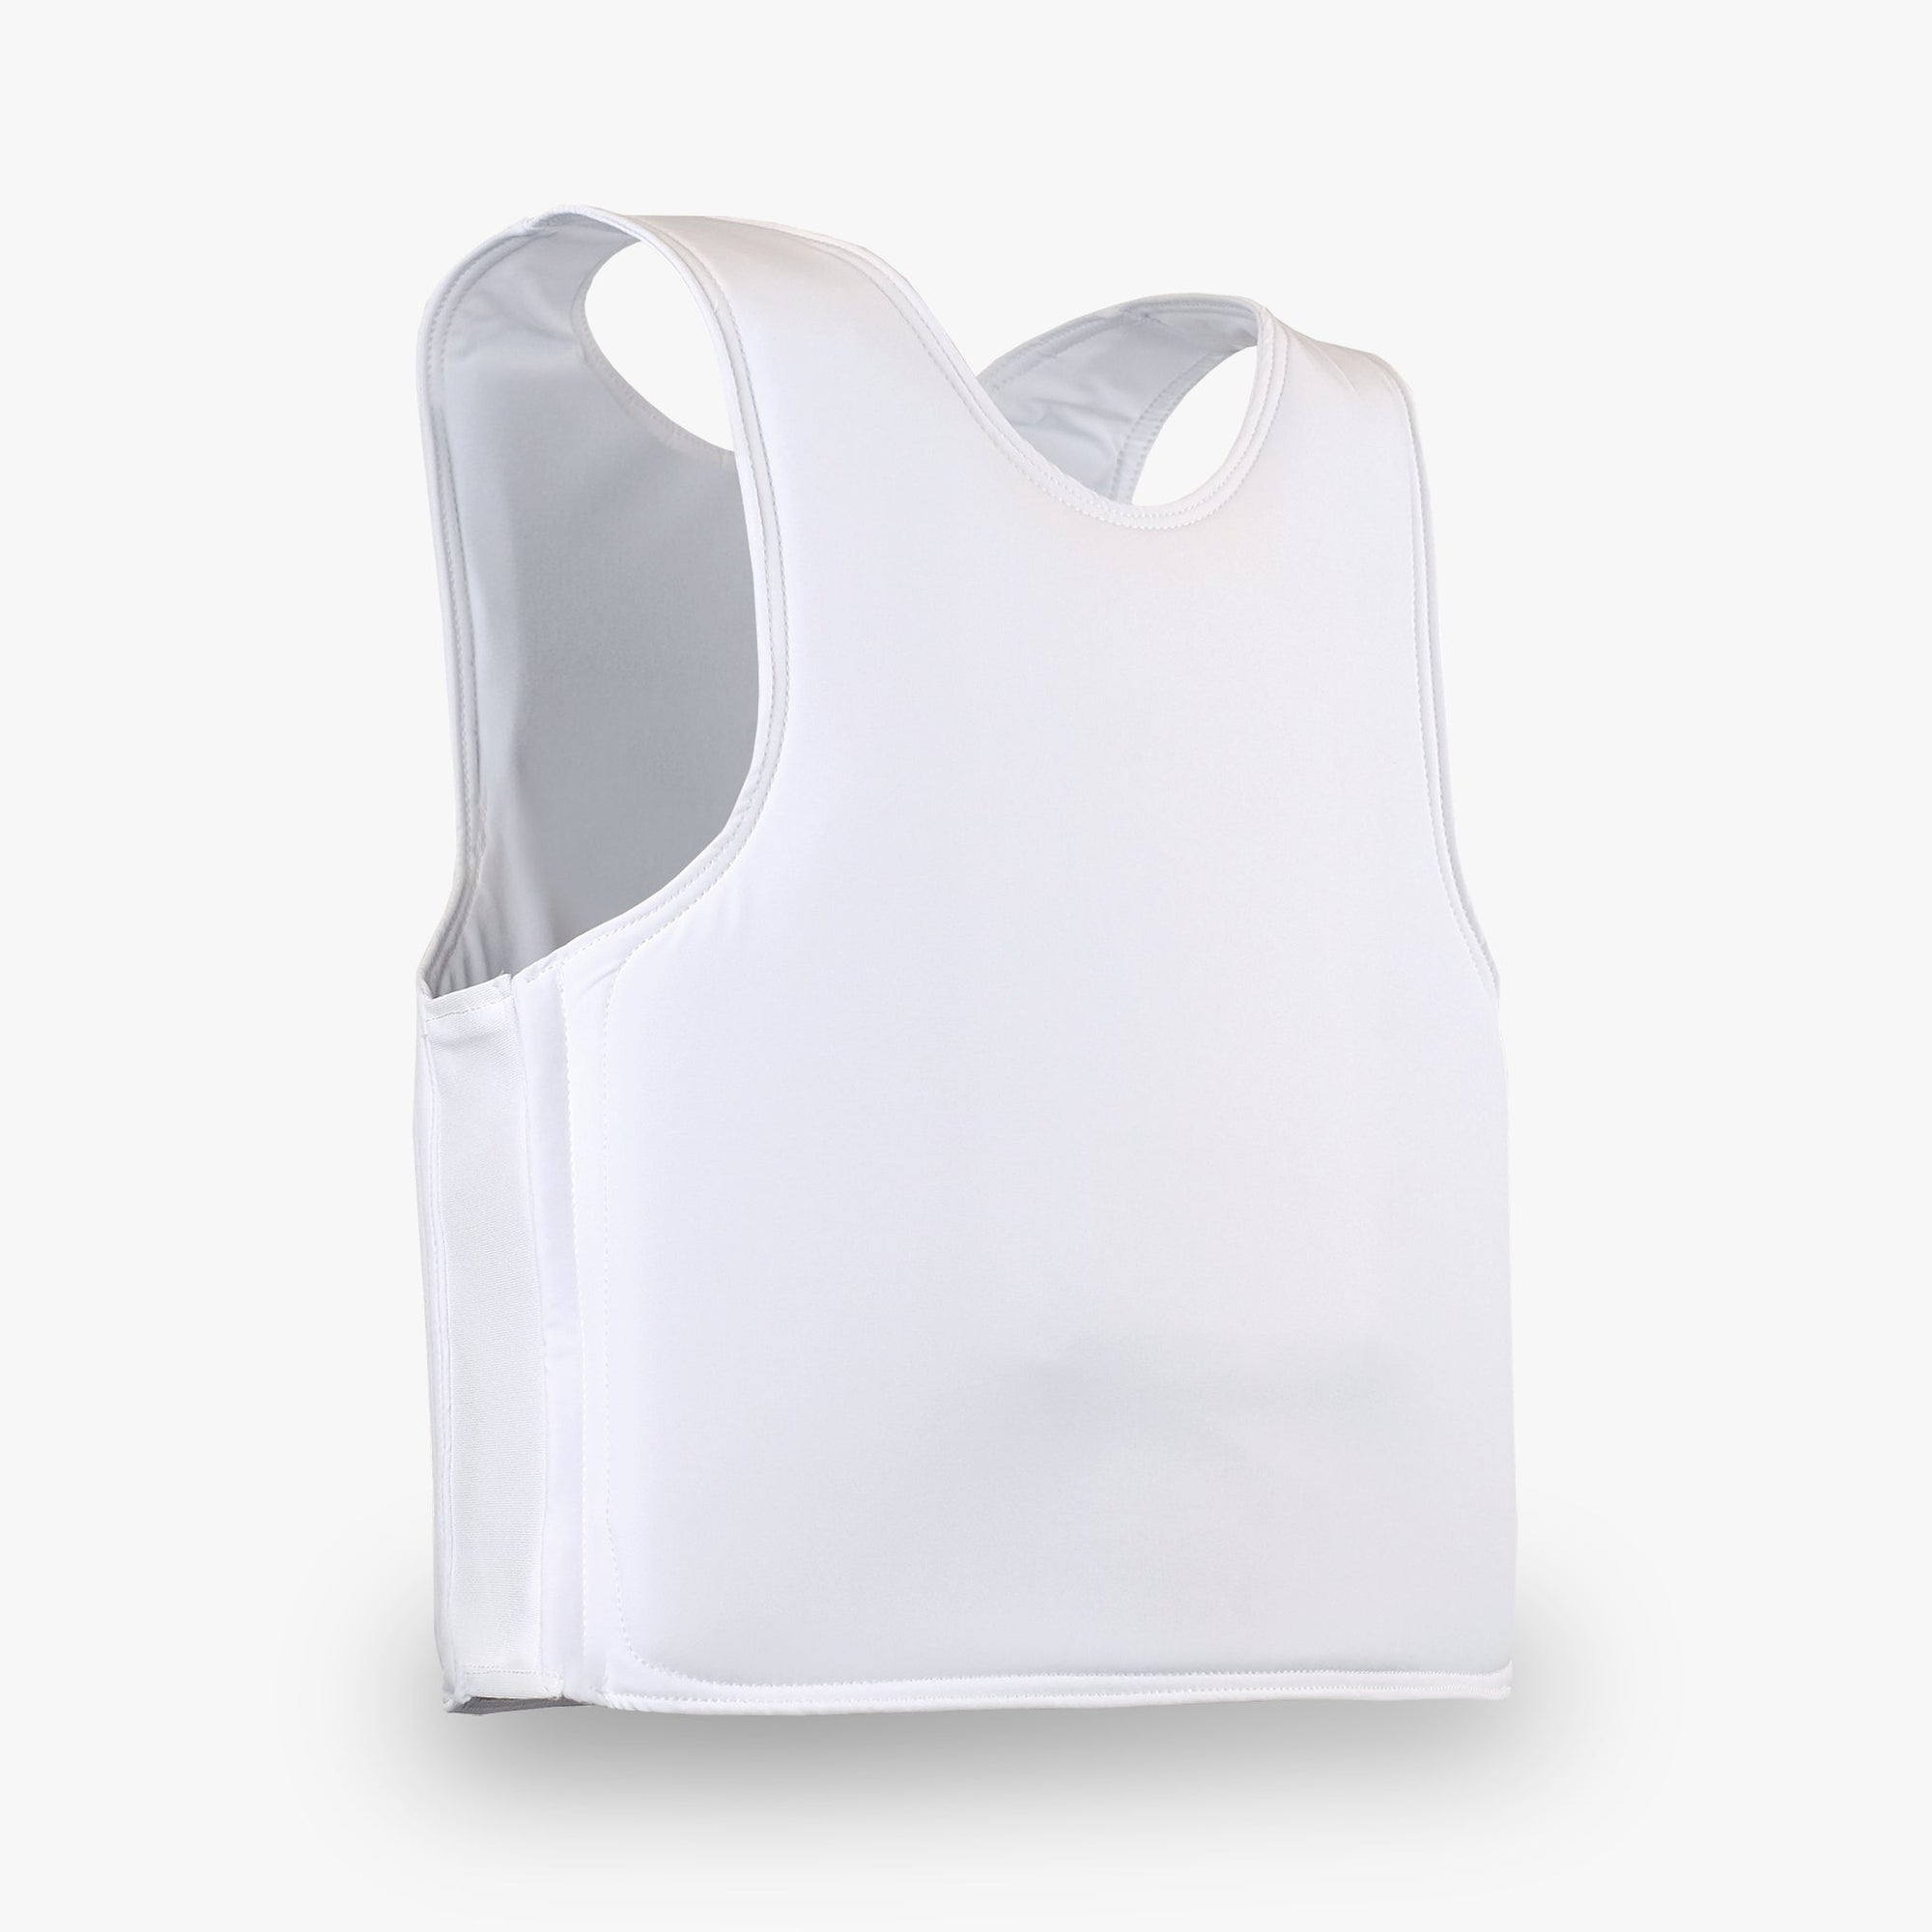 This level 3a soft armor is a discreet, lightweight armor option. Level iiia protection that stops all handgun rounds. This bulletproof vest is nij certified.